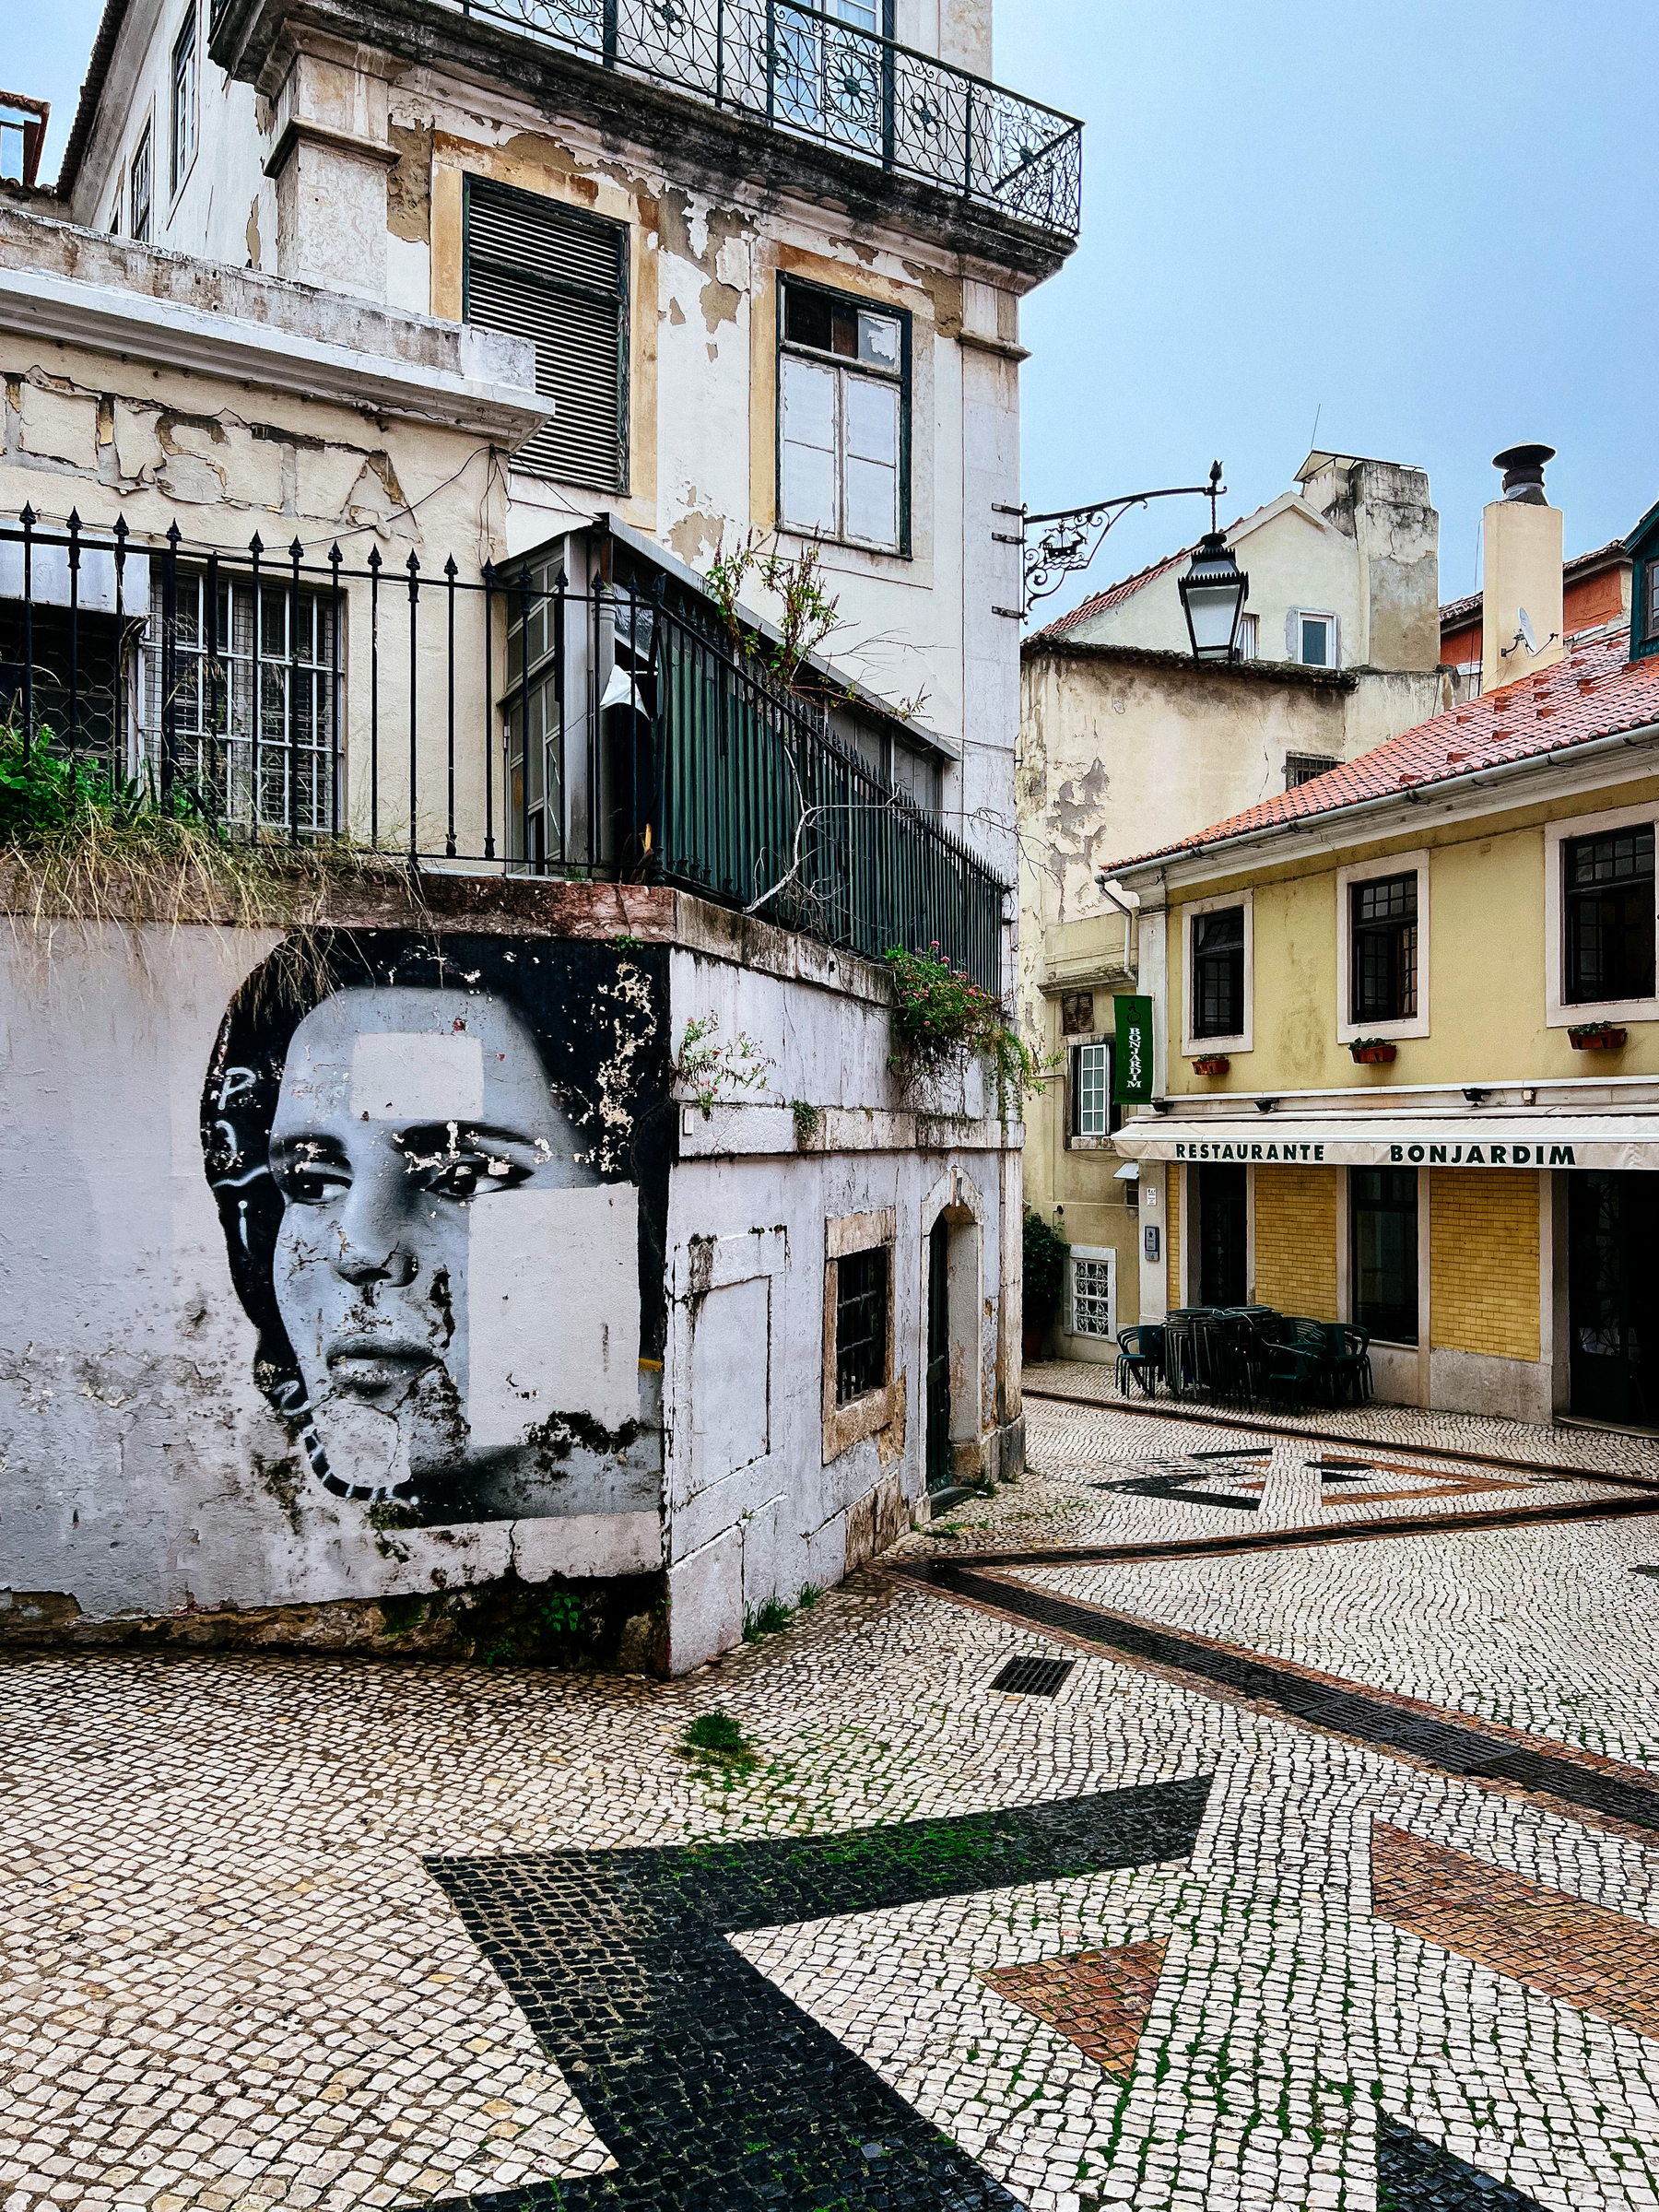 A portrait of Amália, the fado singer, is graffitied on a wall